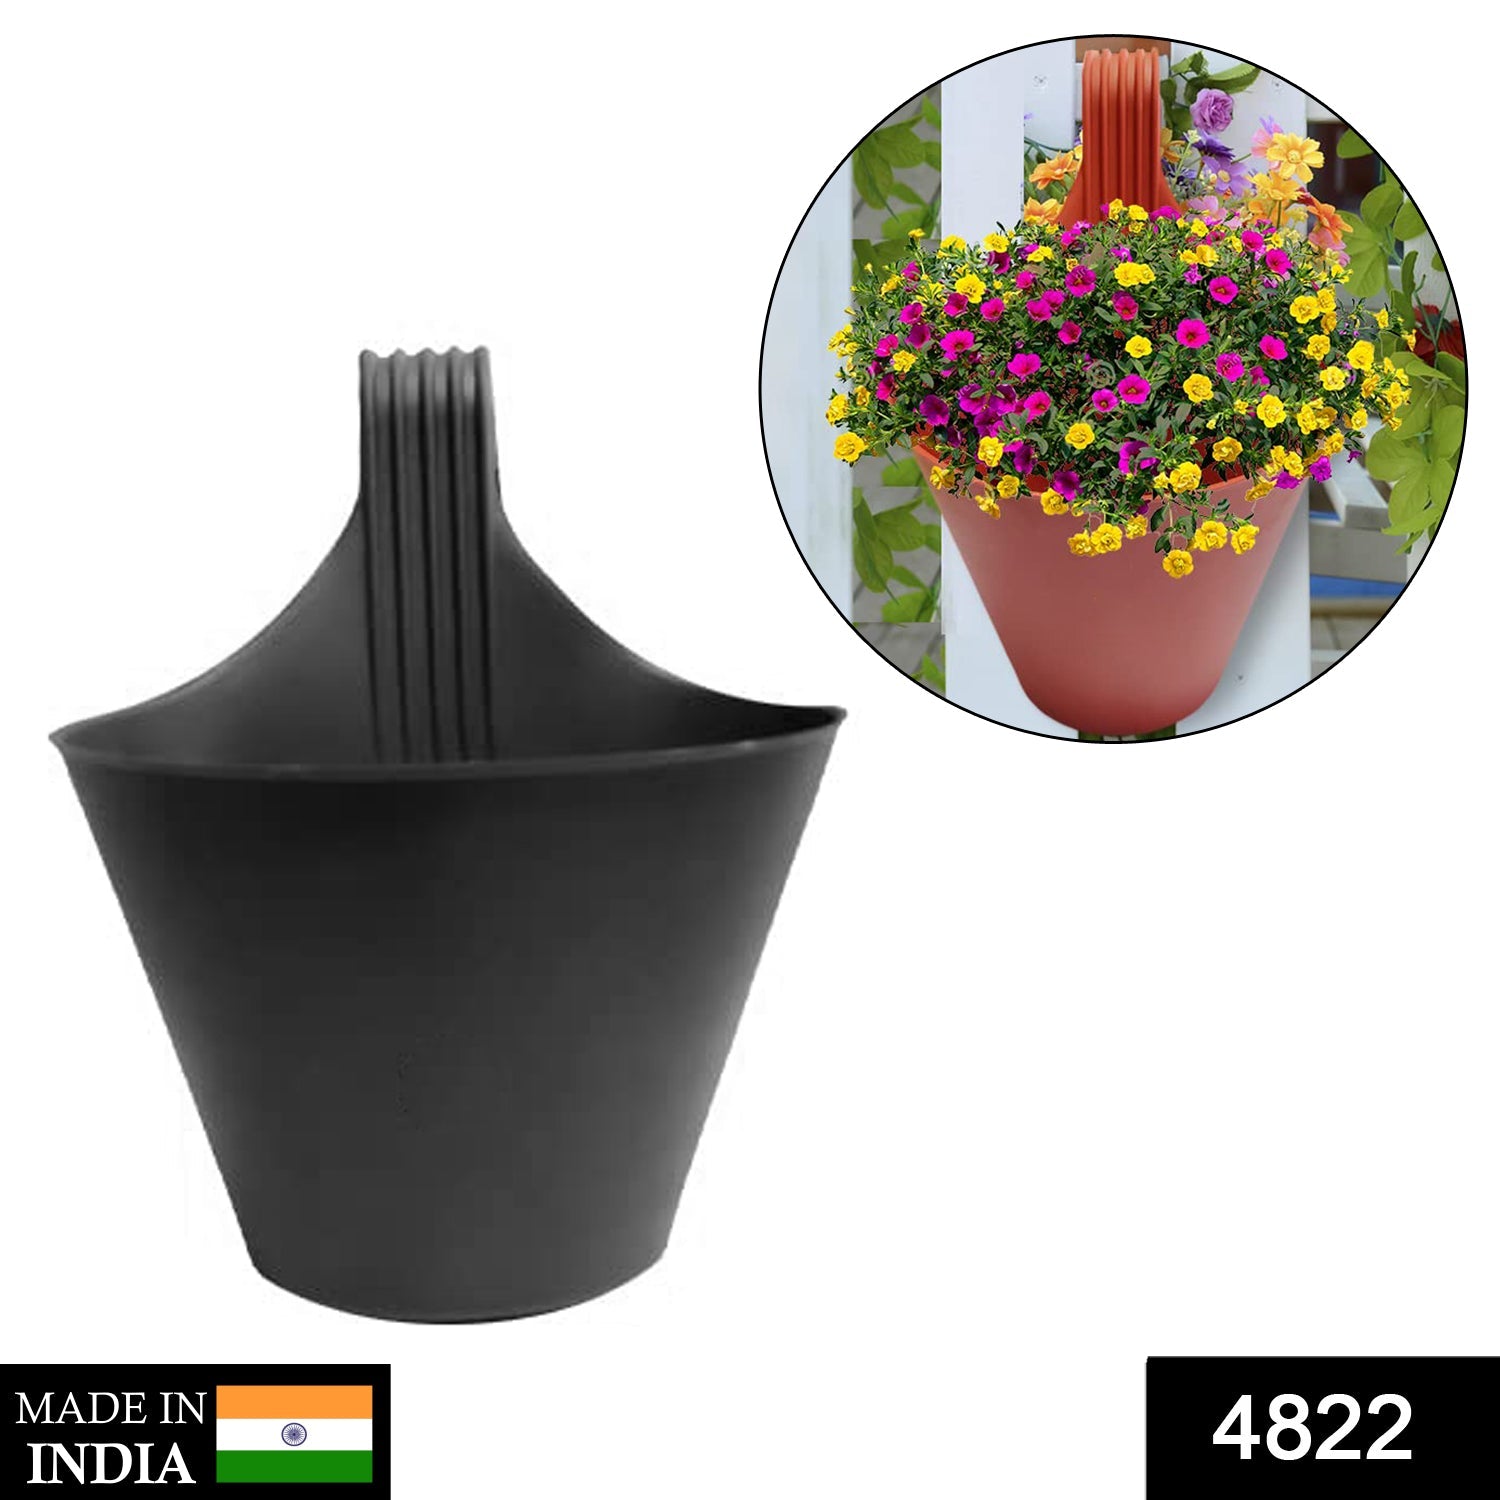 Hanging Planter Pot used for storing and holding plants and flowers in it and this is widely used in in all kinds of gardening and household places etc.